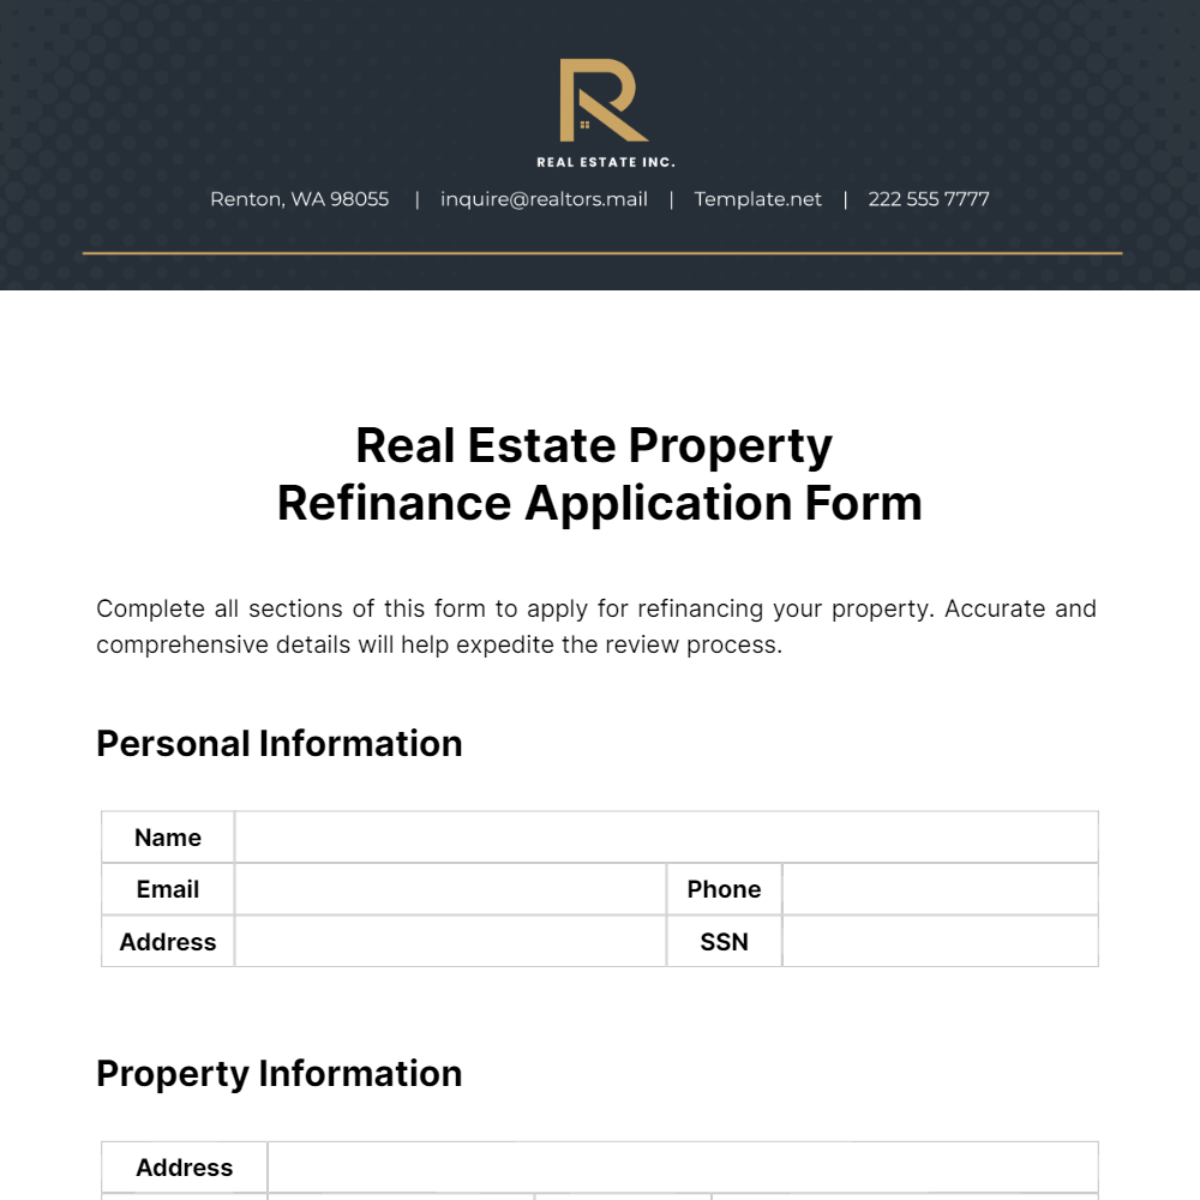 Real Estate Property Refinance Application Form Template